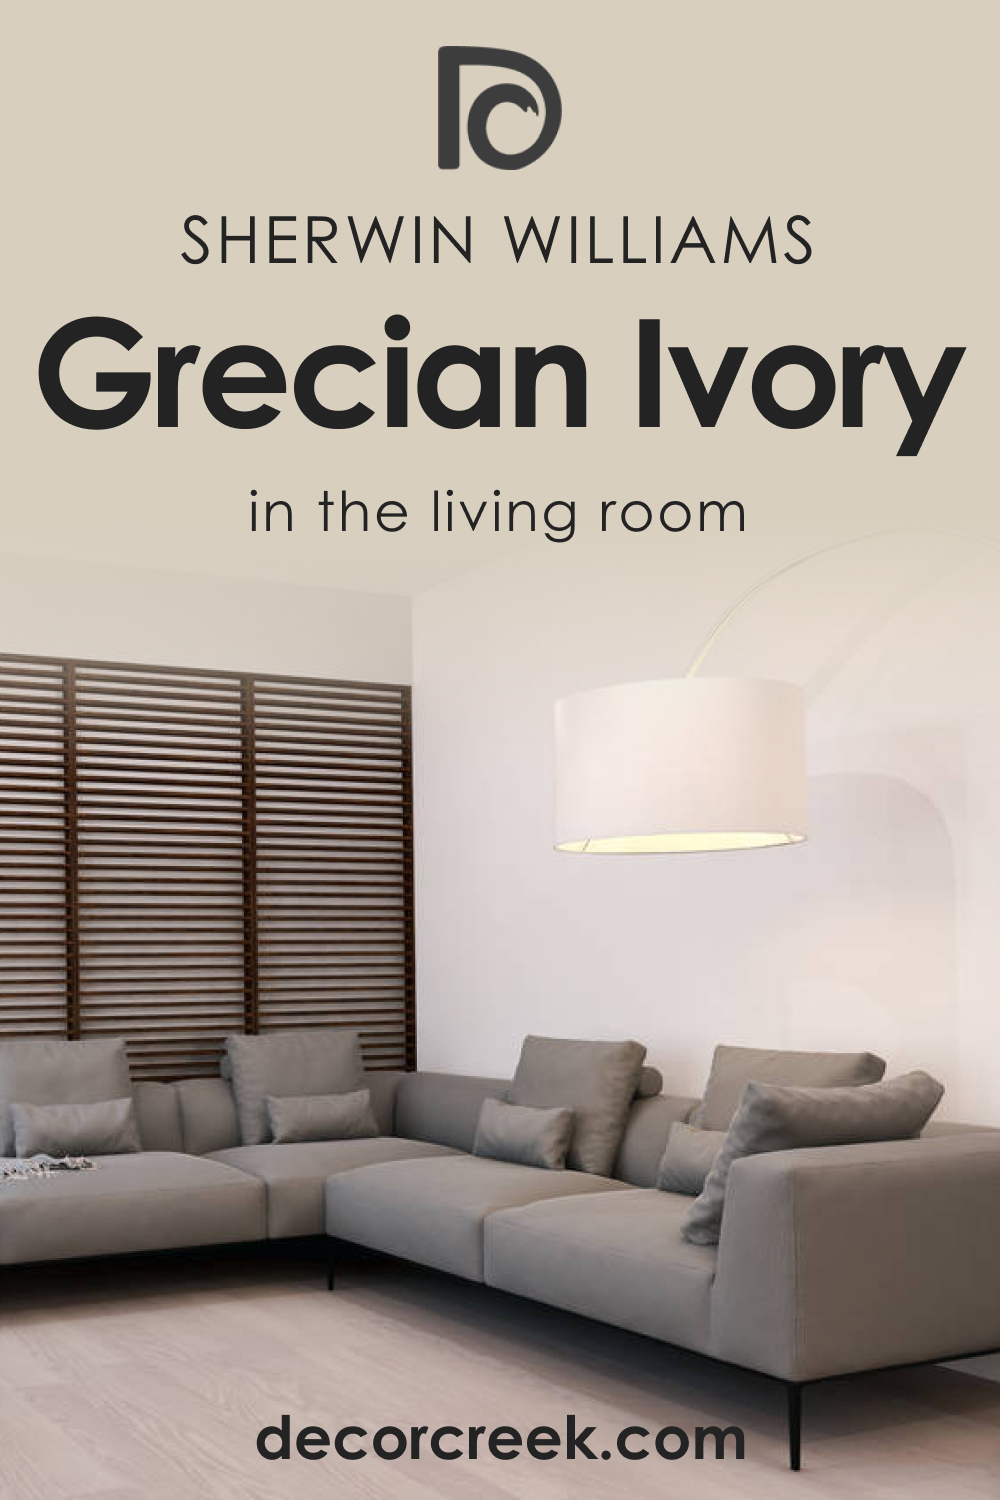 How to Use SW 7541 Grecian Ivory in the Living Room?